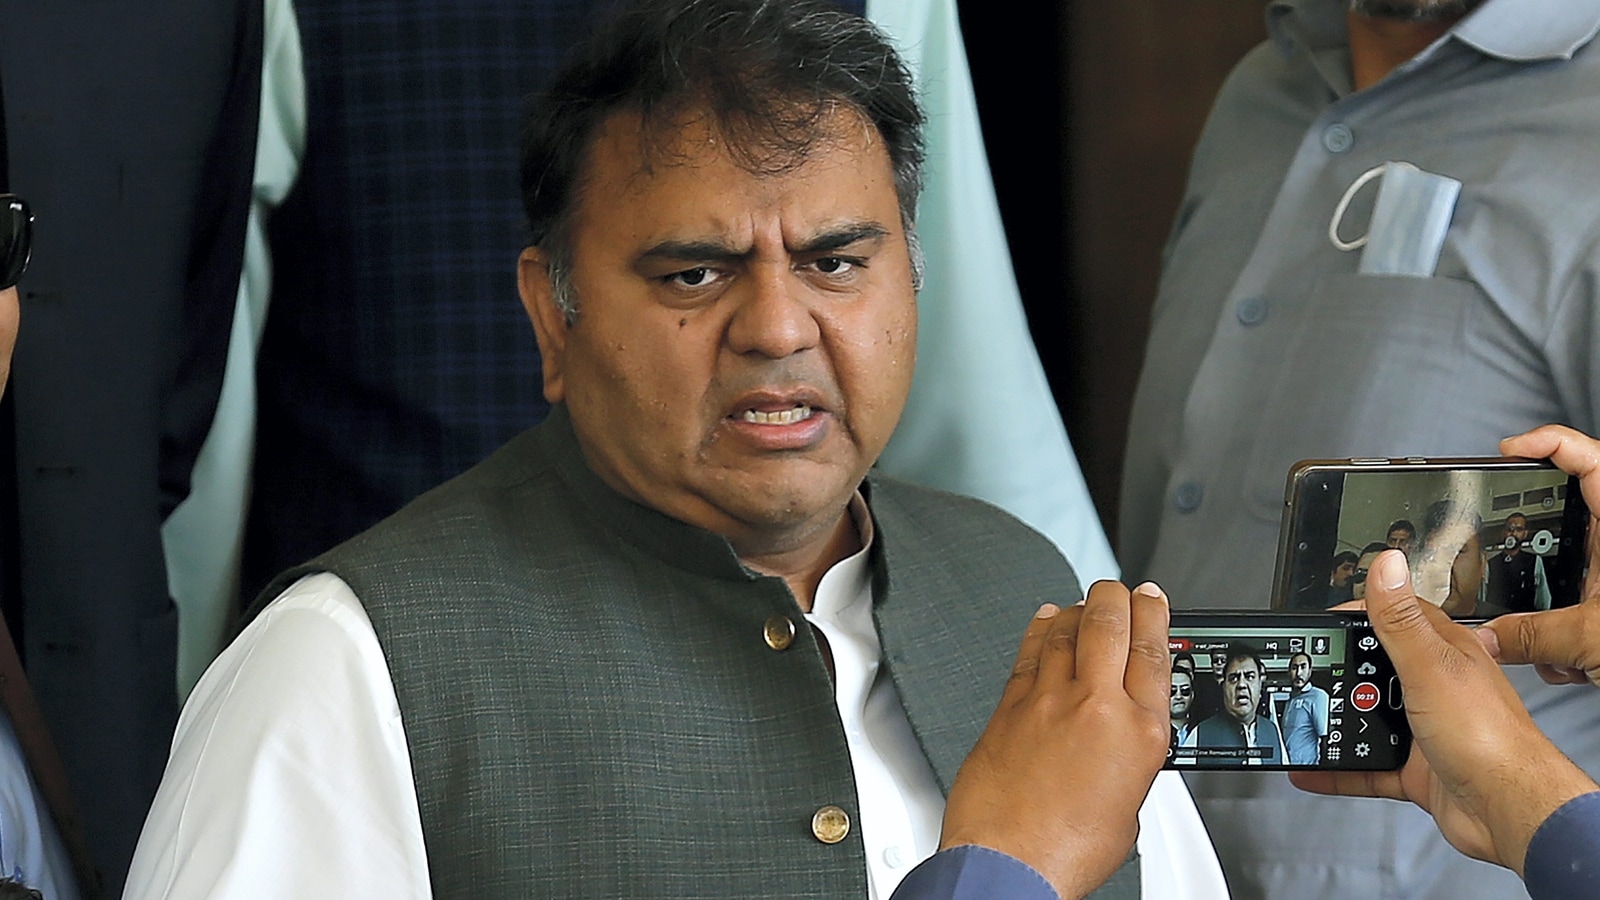 Imran Khan's party leader Fawad Chaudhry ‘arrested’ from home